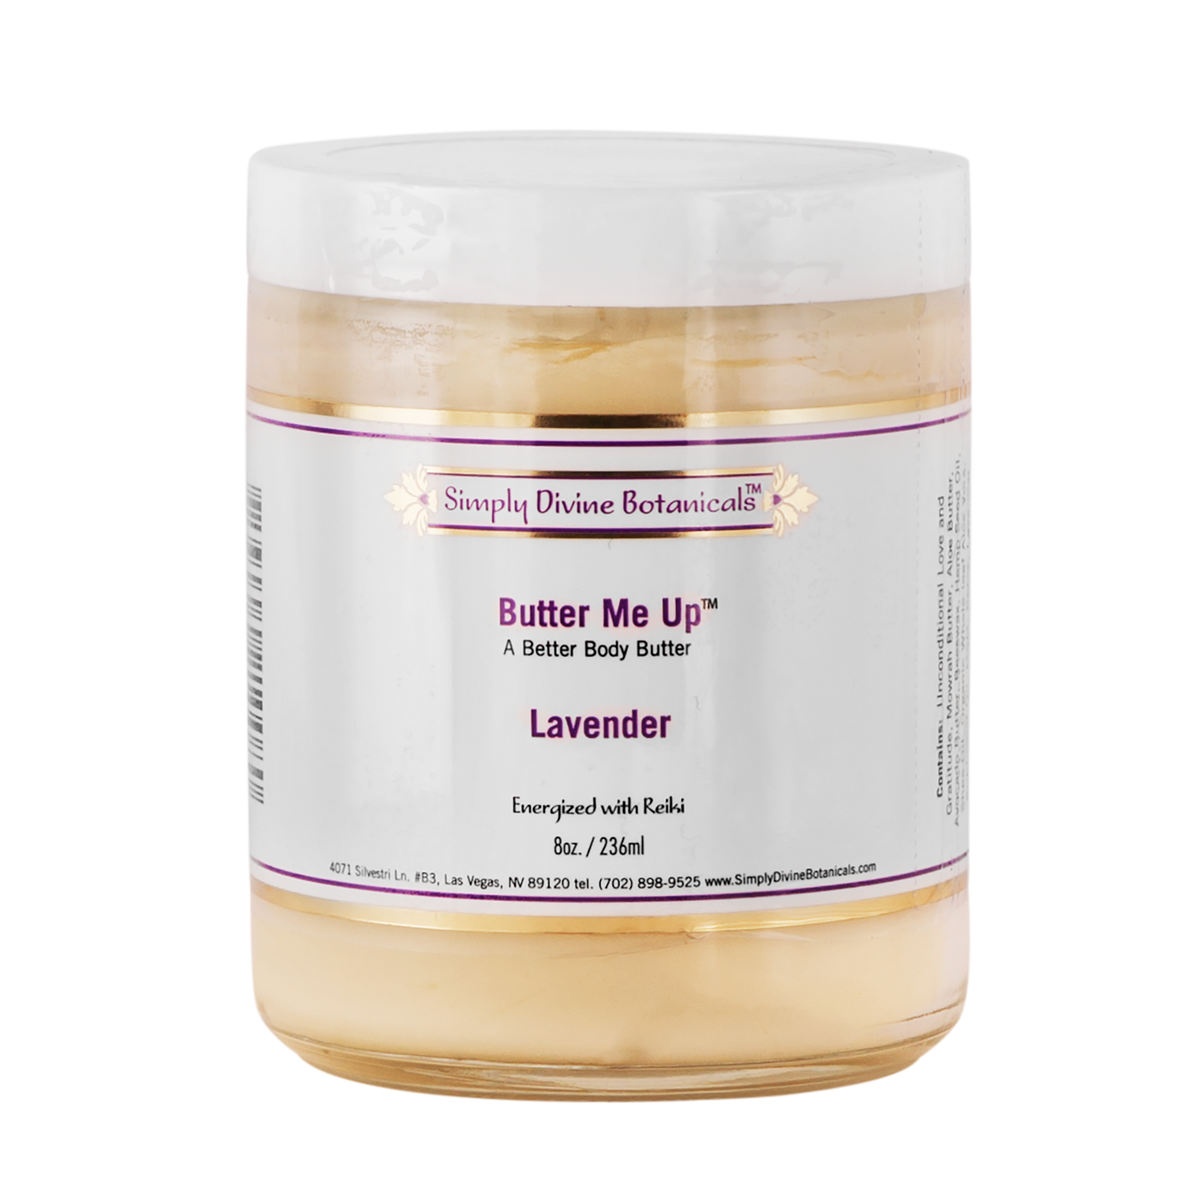 Butter Me Up Lavender | Simply Divine Botanicals | Raw Living UK | Skin Care &amp; Beauty | Simply Divine Botanicals Natural Body Butter is a Smooth &amp; Thick Butter Moisturiser for Lush Skin, with Aloe &amp; Avocado Butters, Shea &amp; Essentials Oils.